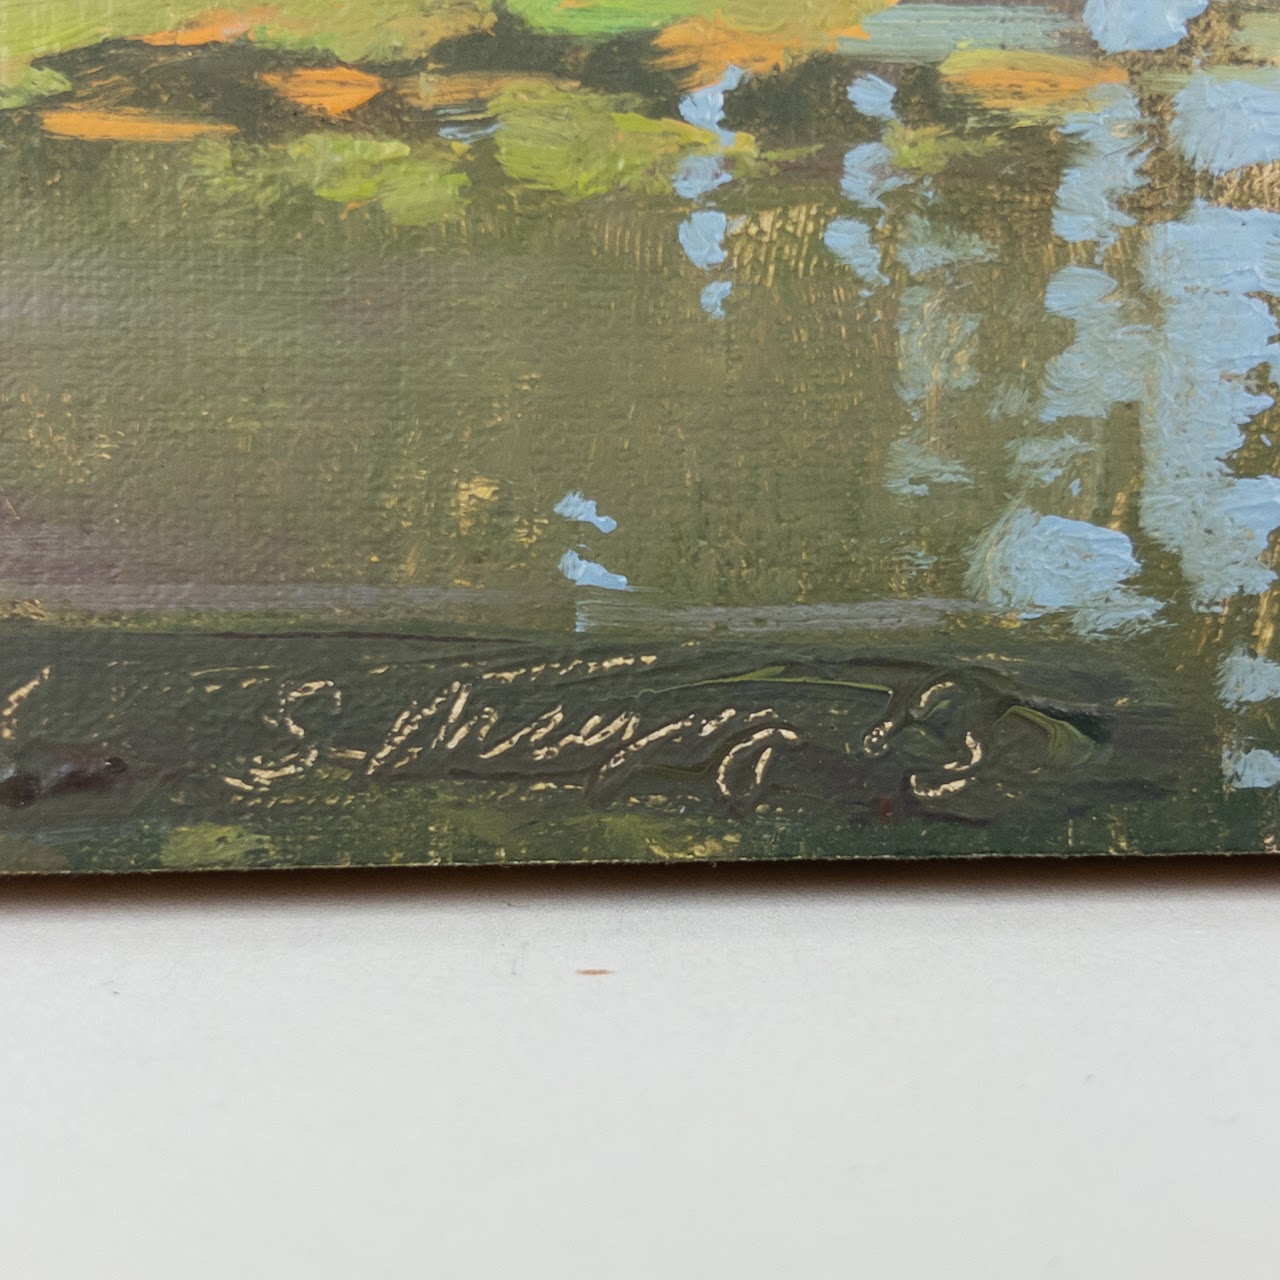 Stephen Magsig "Belle Island Waterlilies" Small Painting